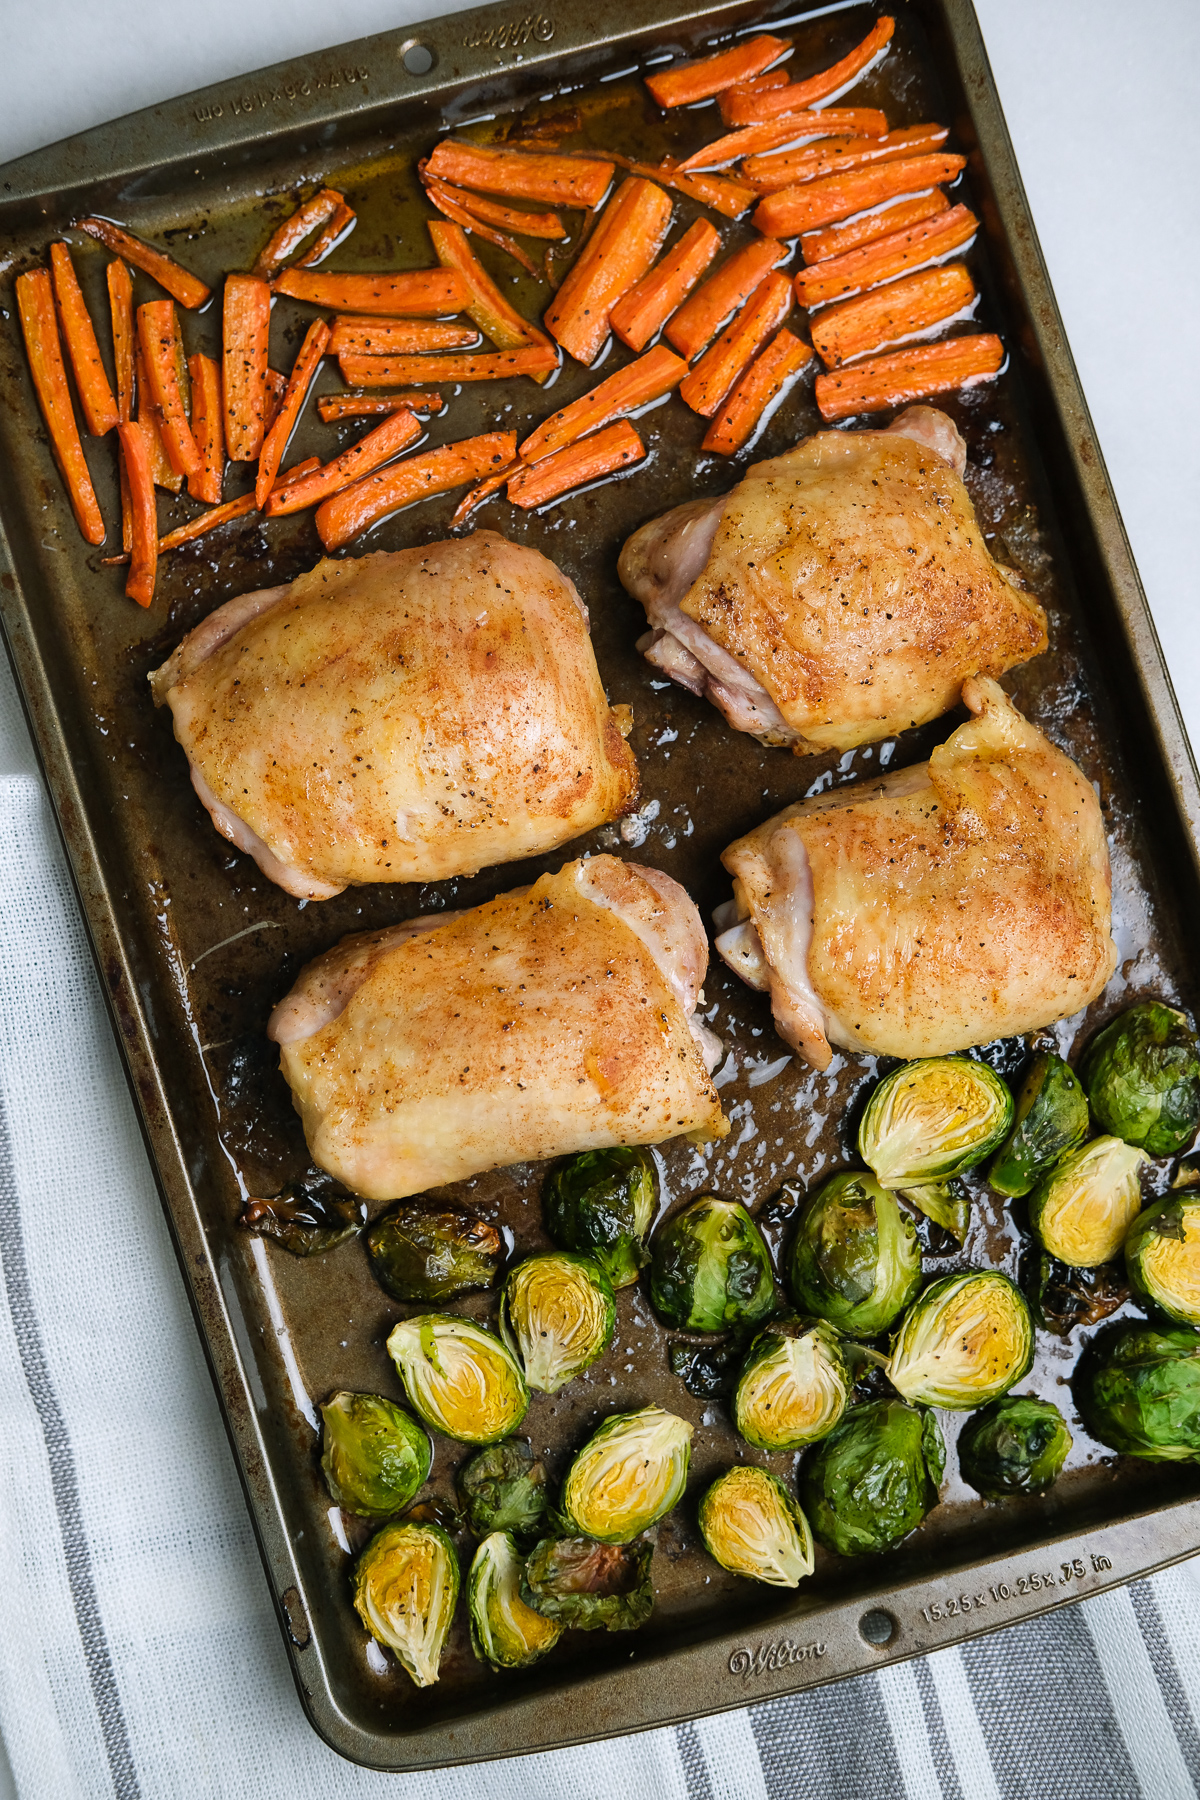 How to Make Sheet Pan Meals {Easy Formula!} - FeelGoodFoodie